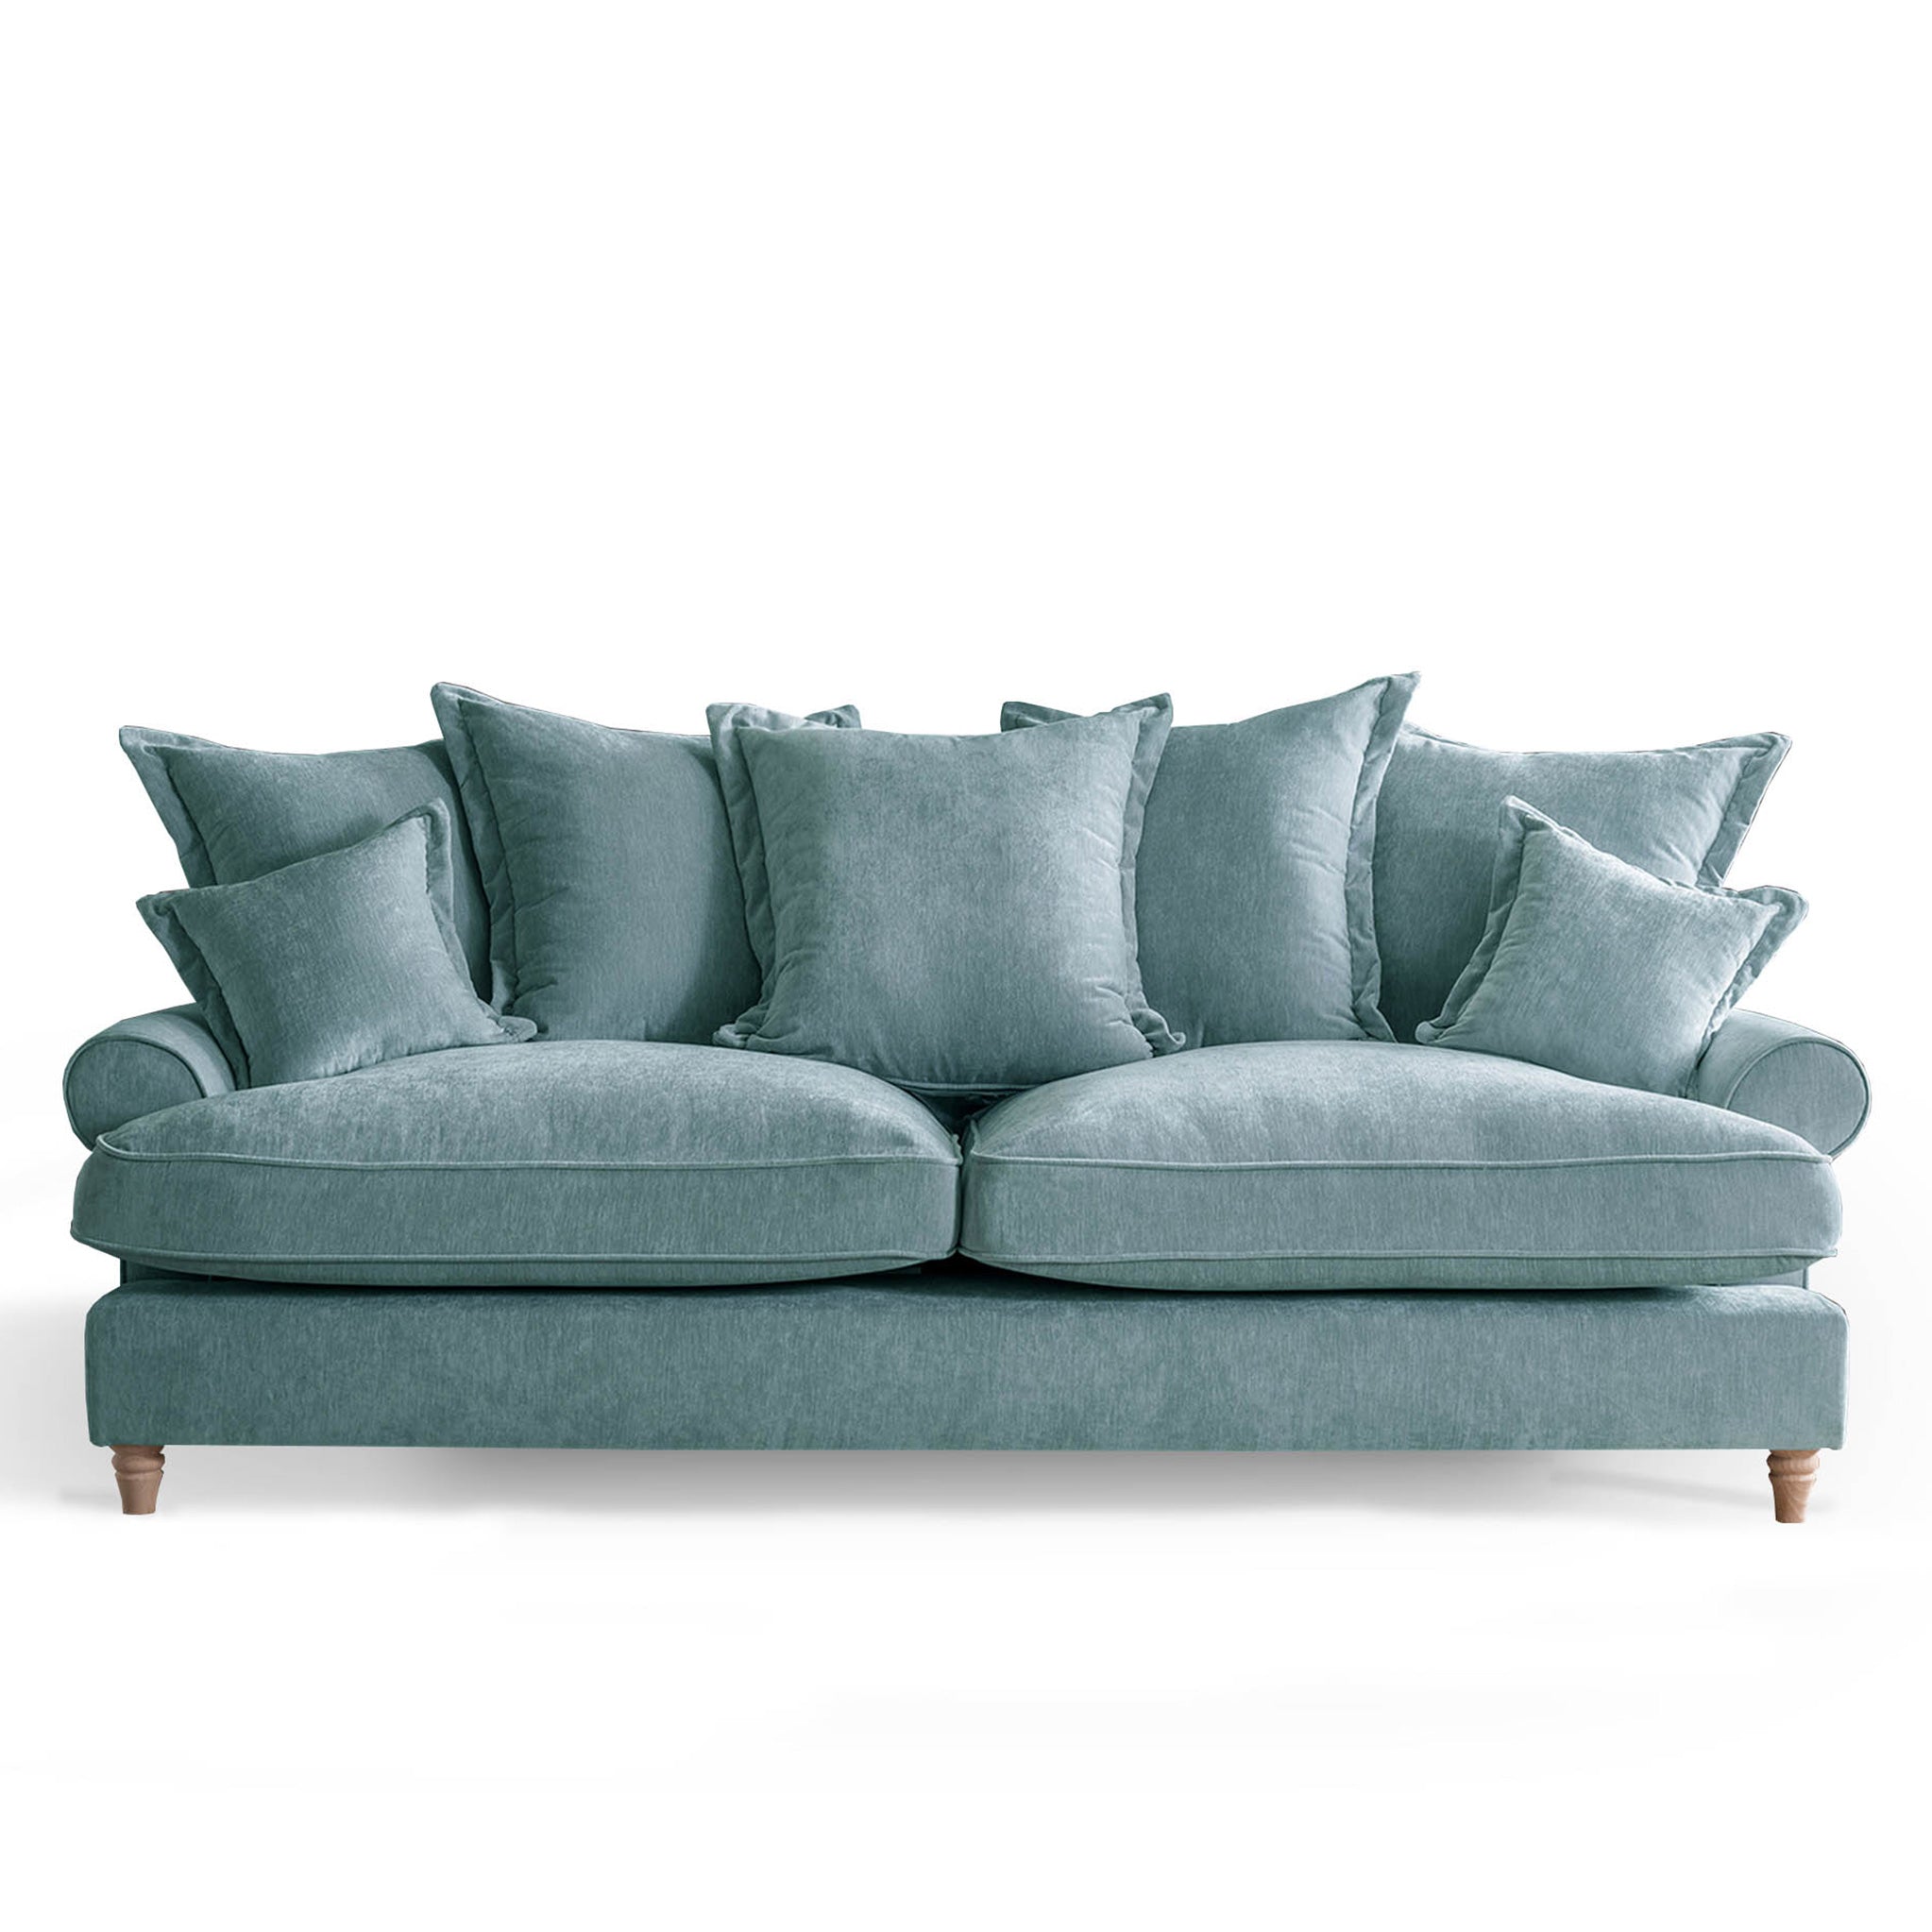 Riley Pillow Back 4 Seater Sofa 8 Colours Made In Uk Roseland